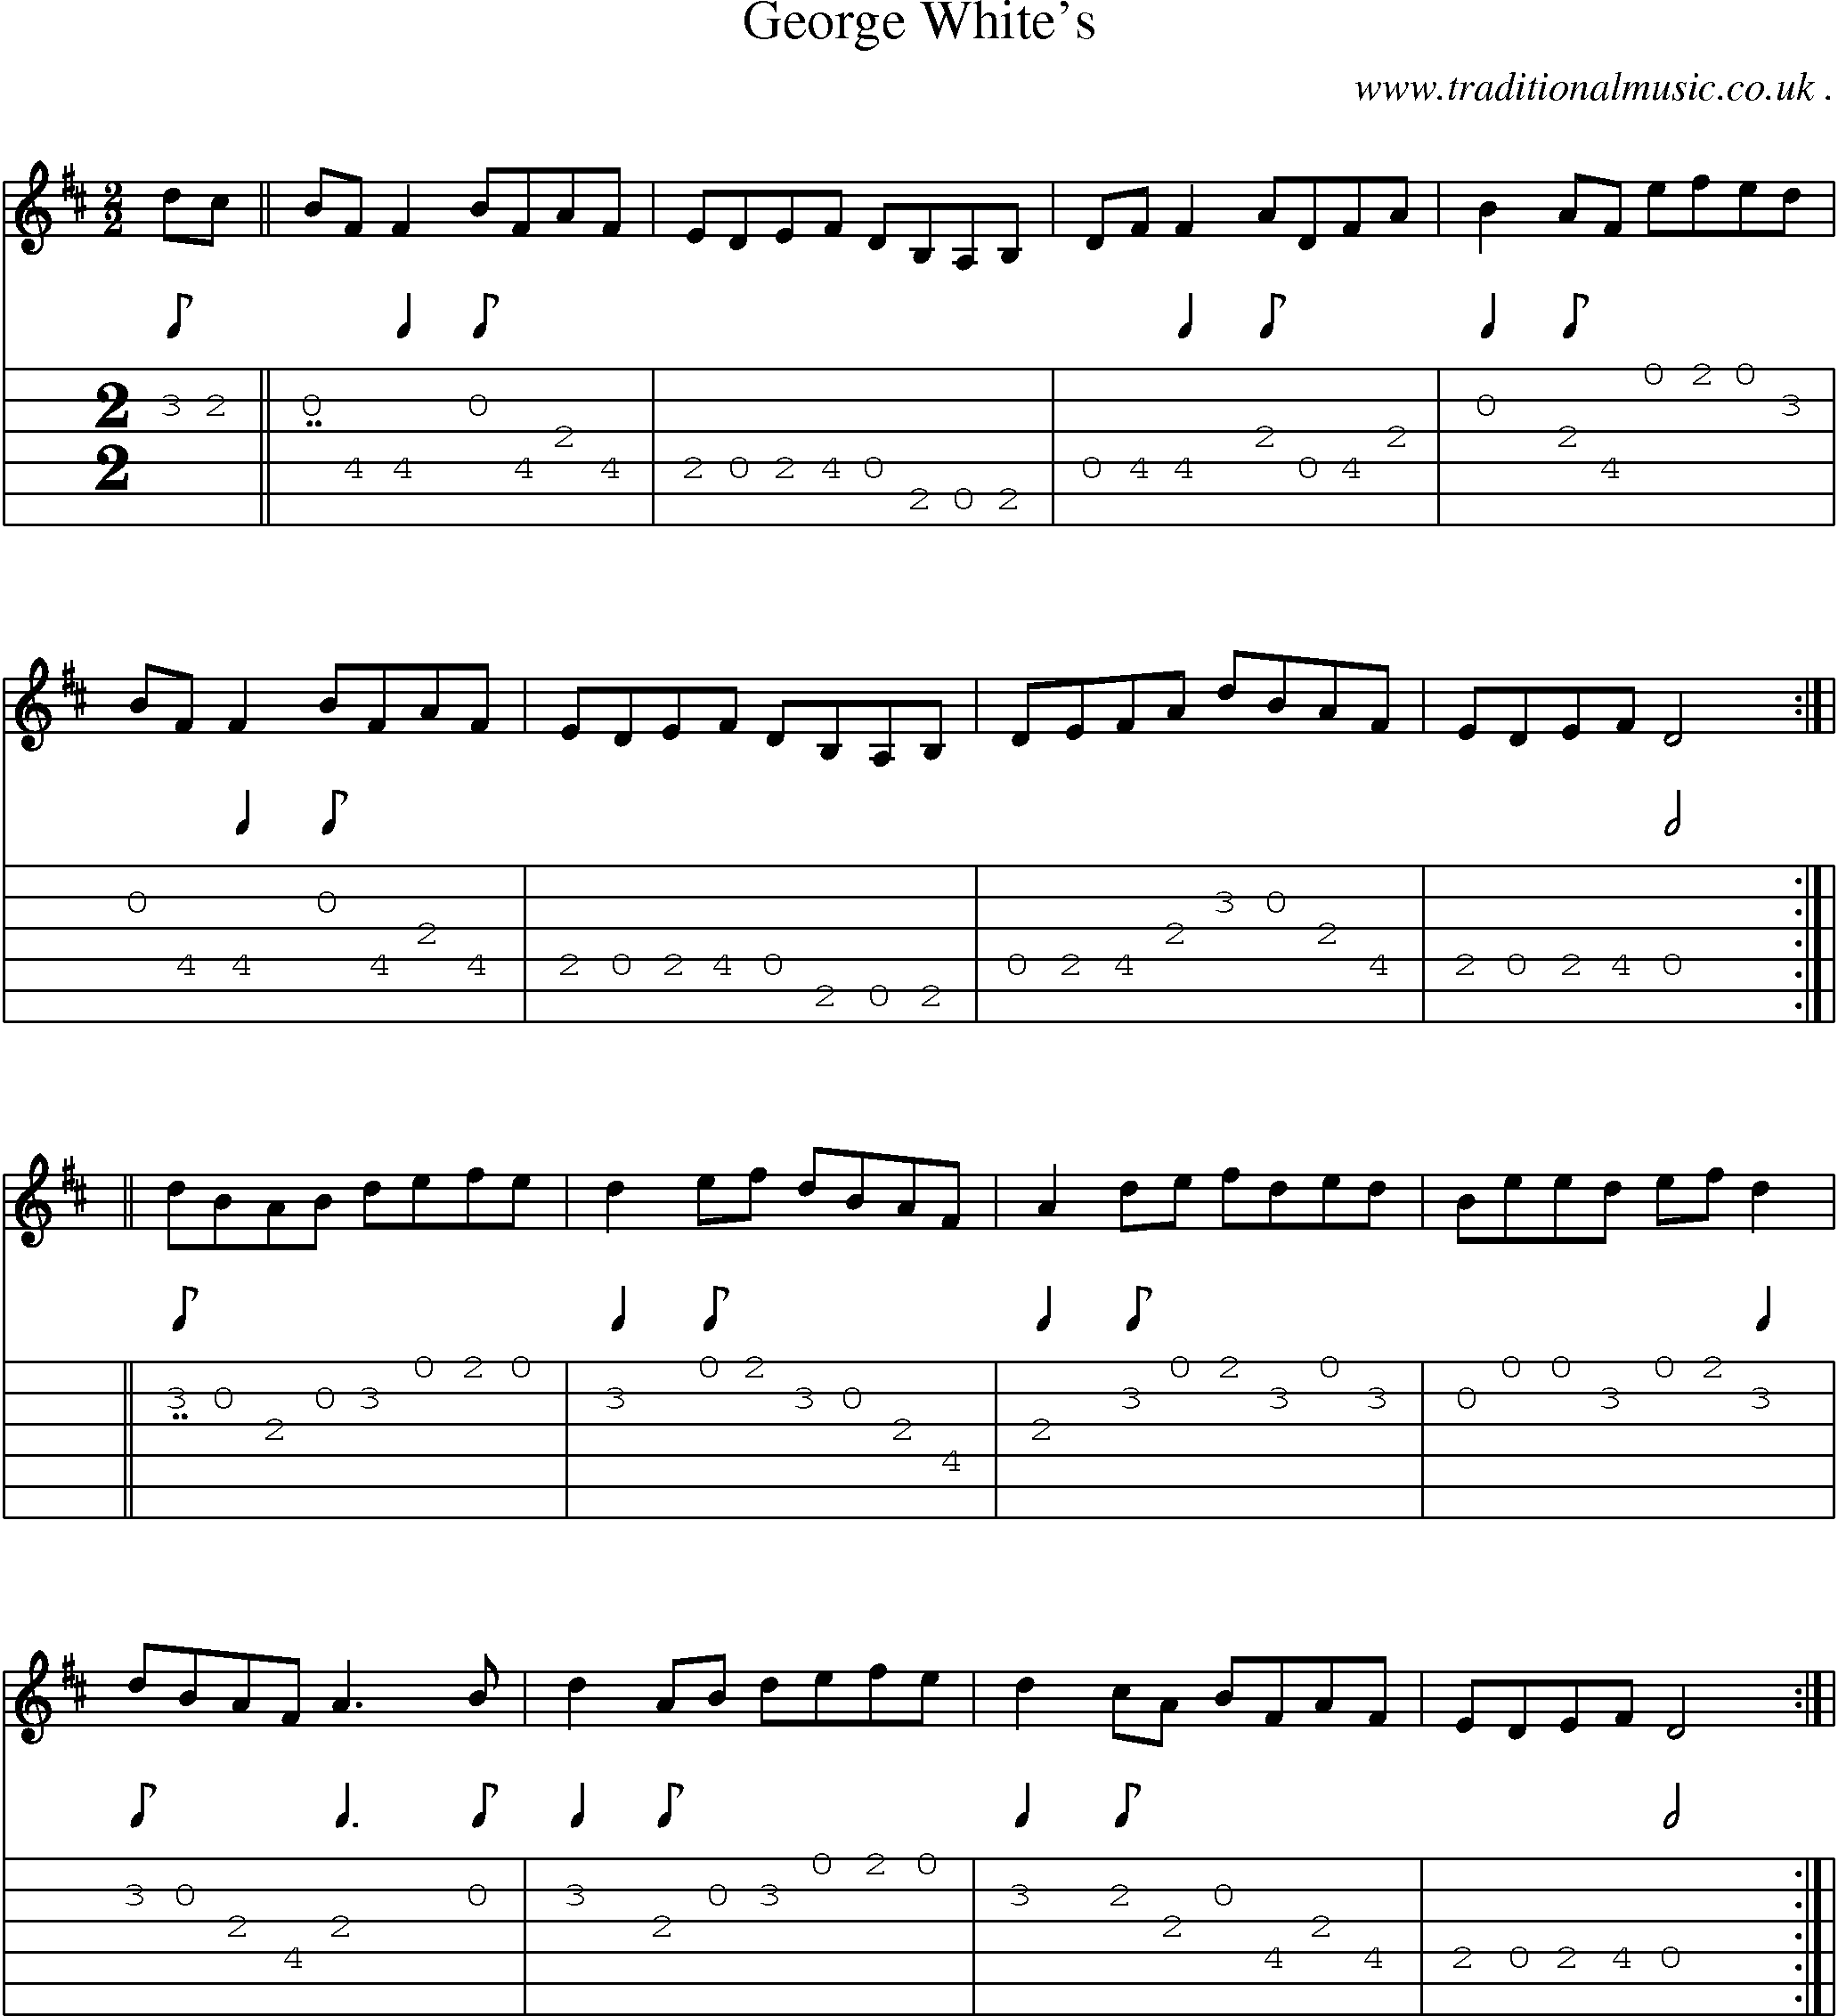 Sheet-Music and Guitar Tabs for George Whites